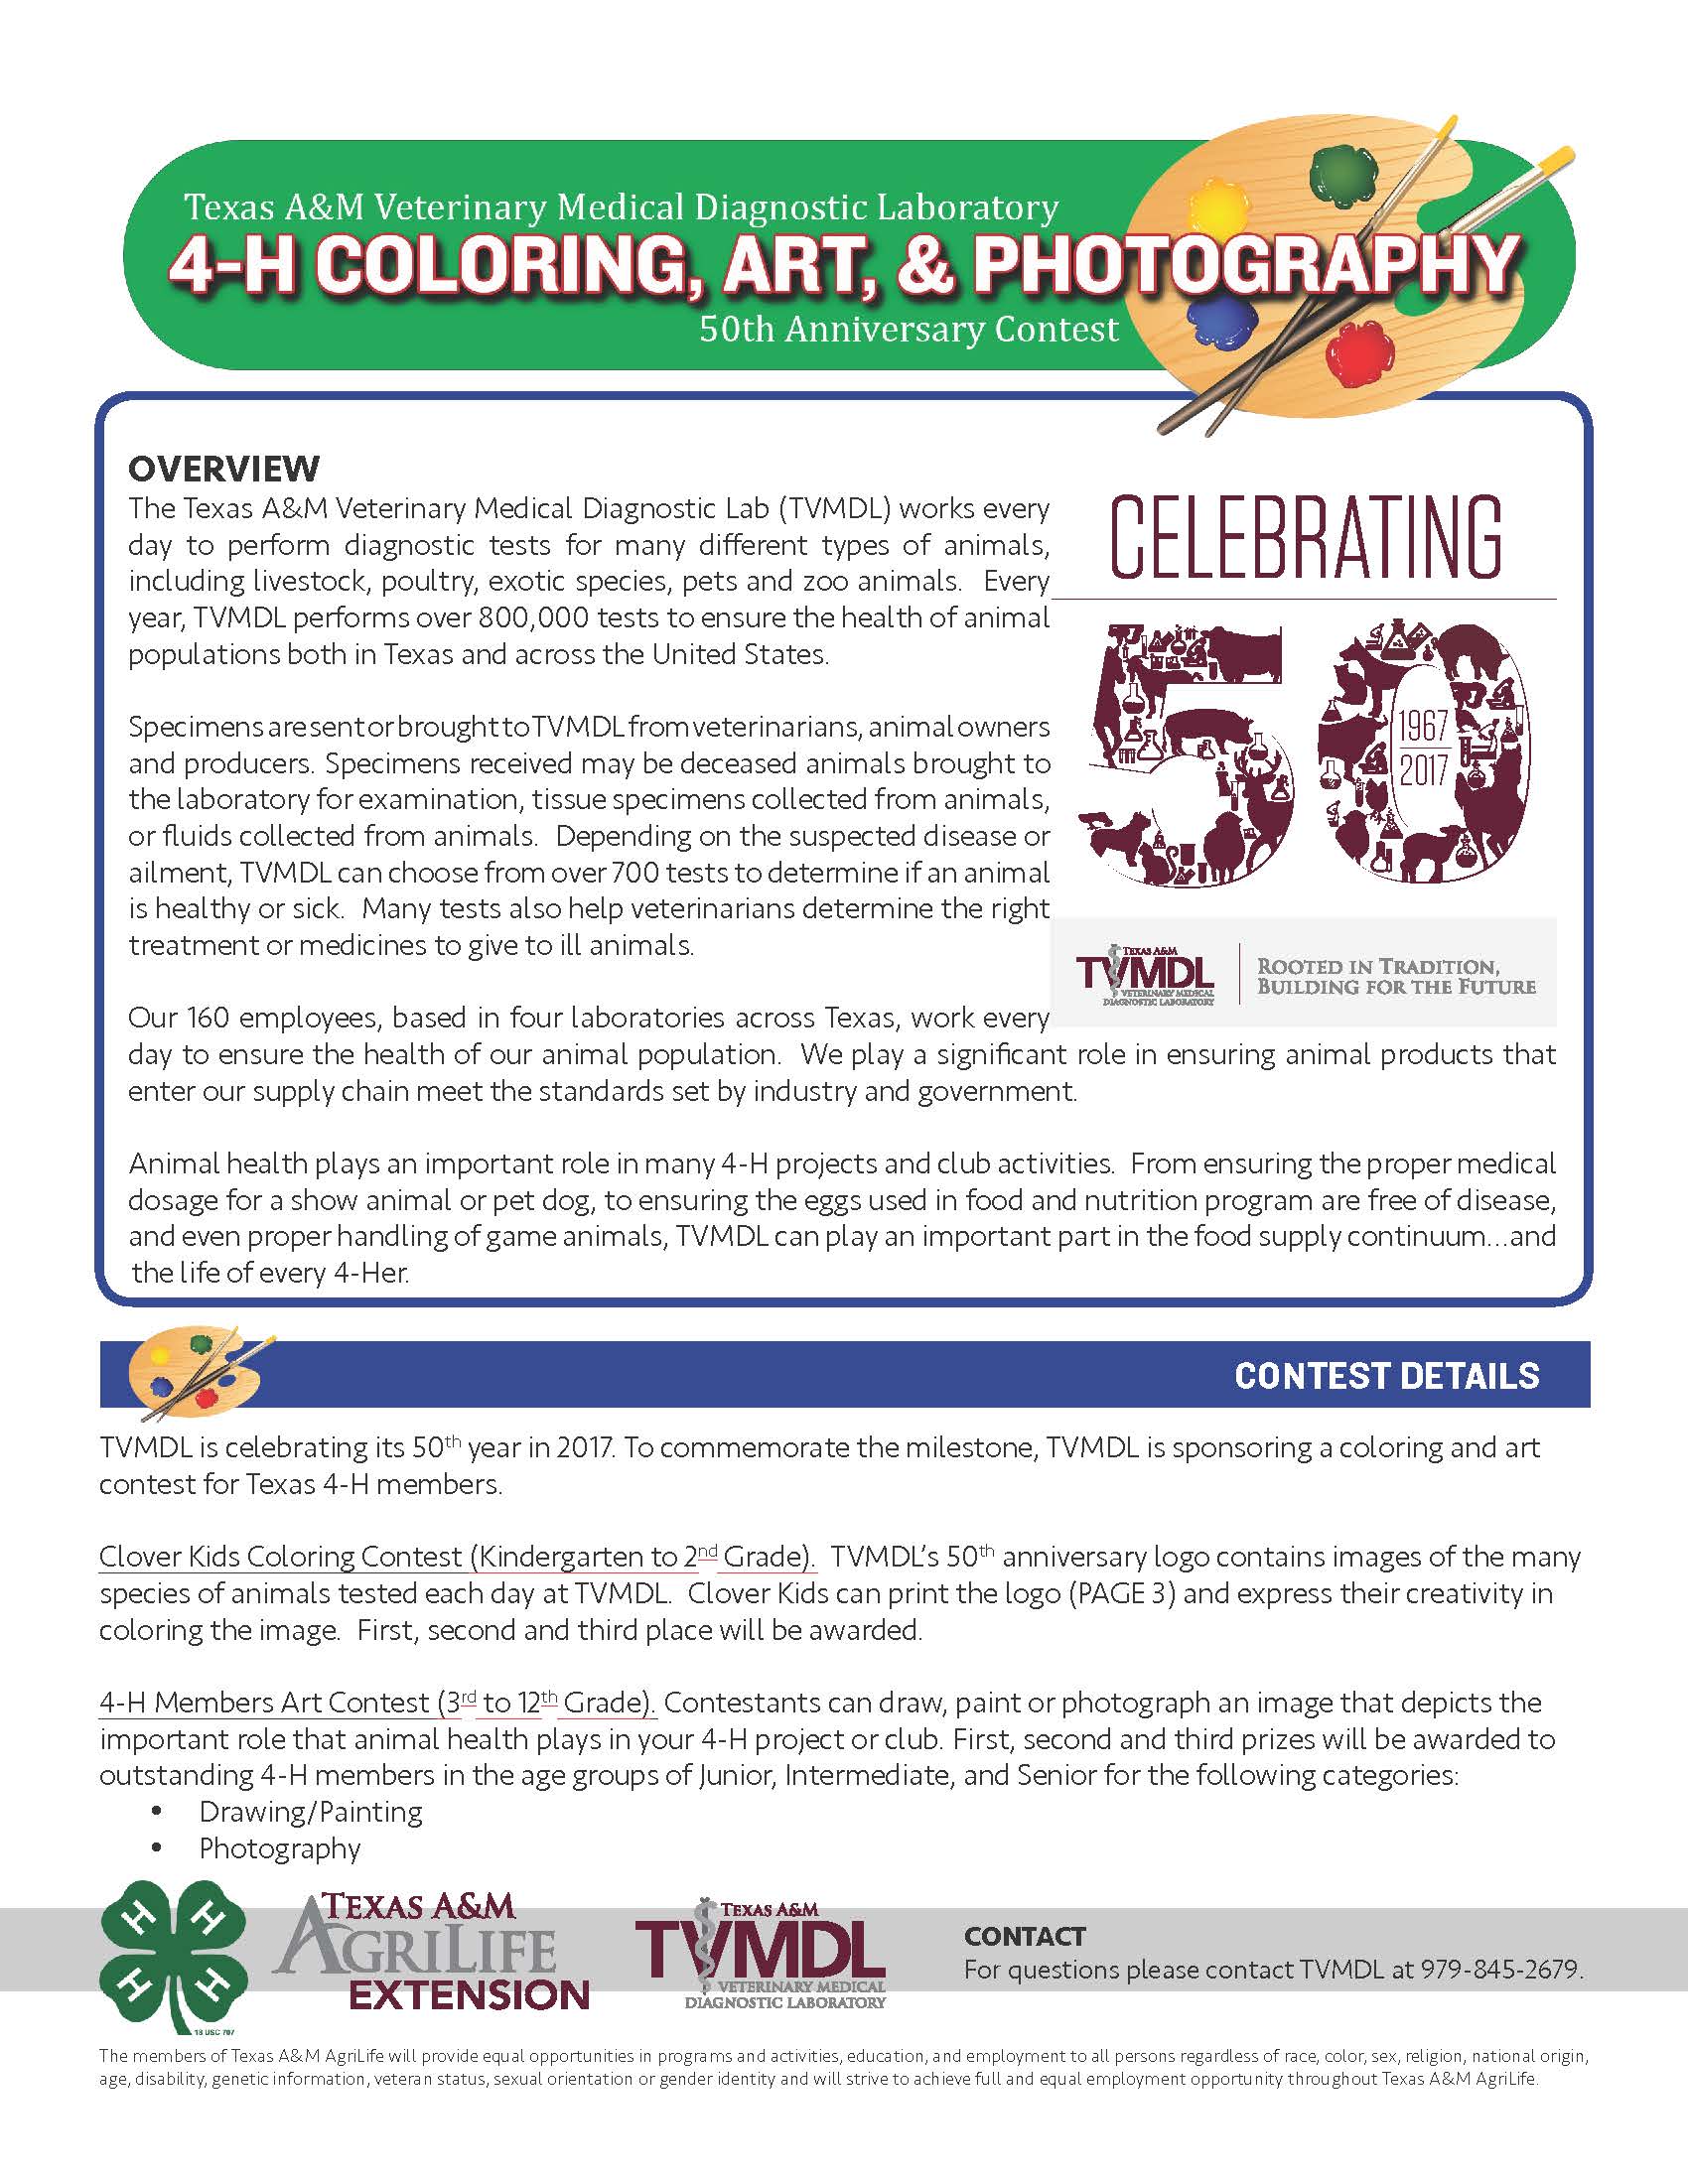 TVMDL is celebrating its 50th year in 2017. To commemorate the milestone, TVMDL is sponsoring a coloring and art contest for Texas 4-H members.